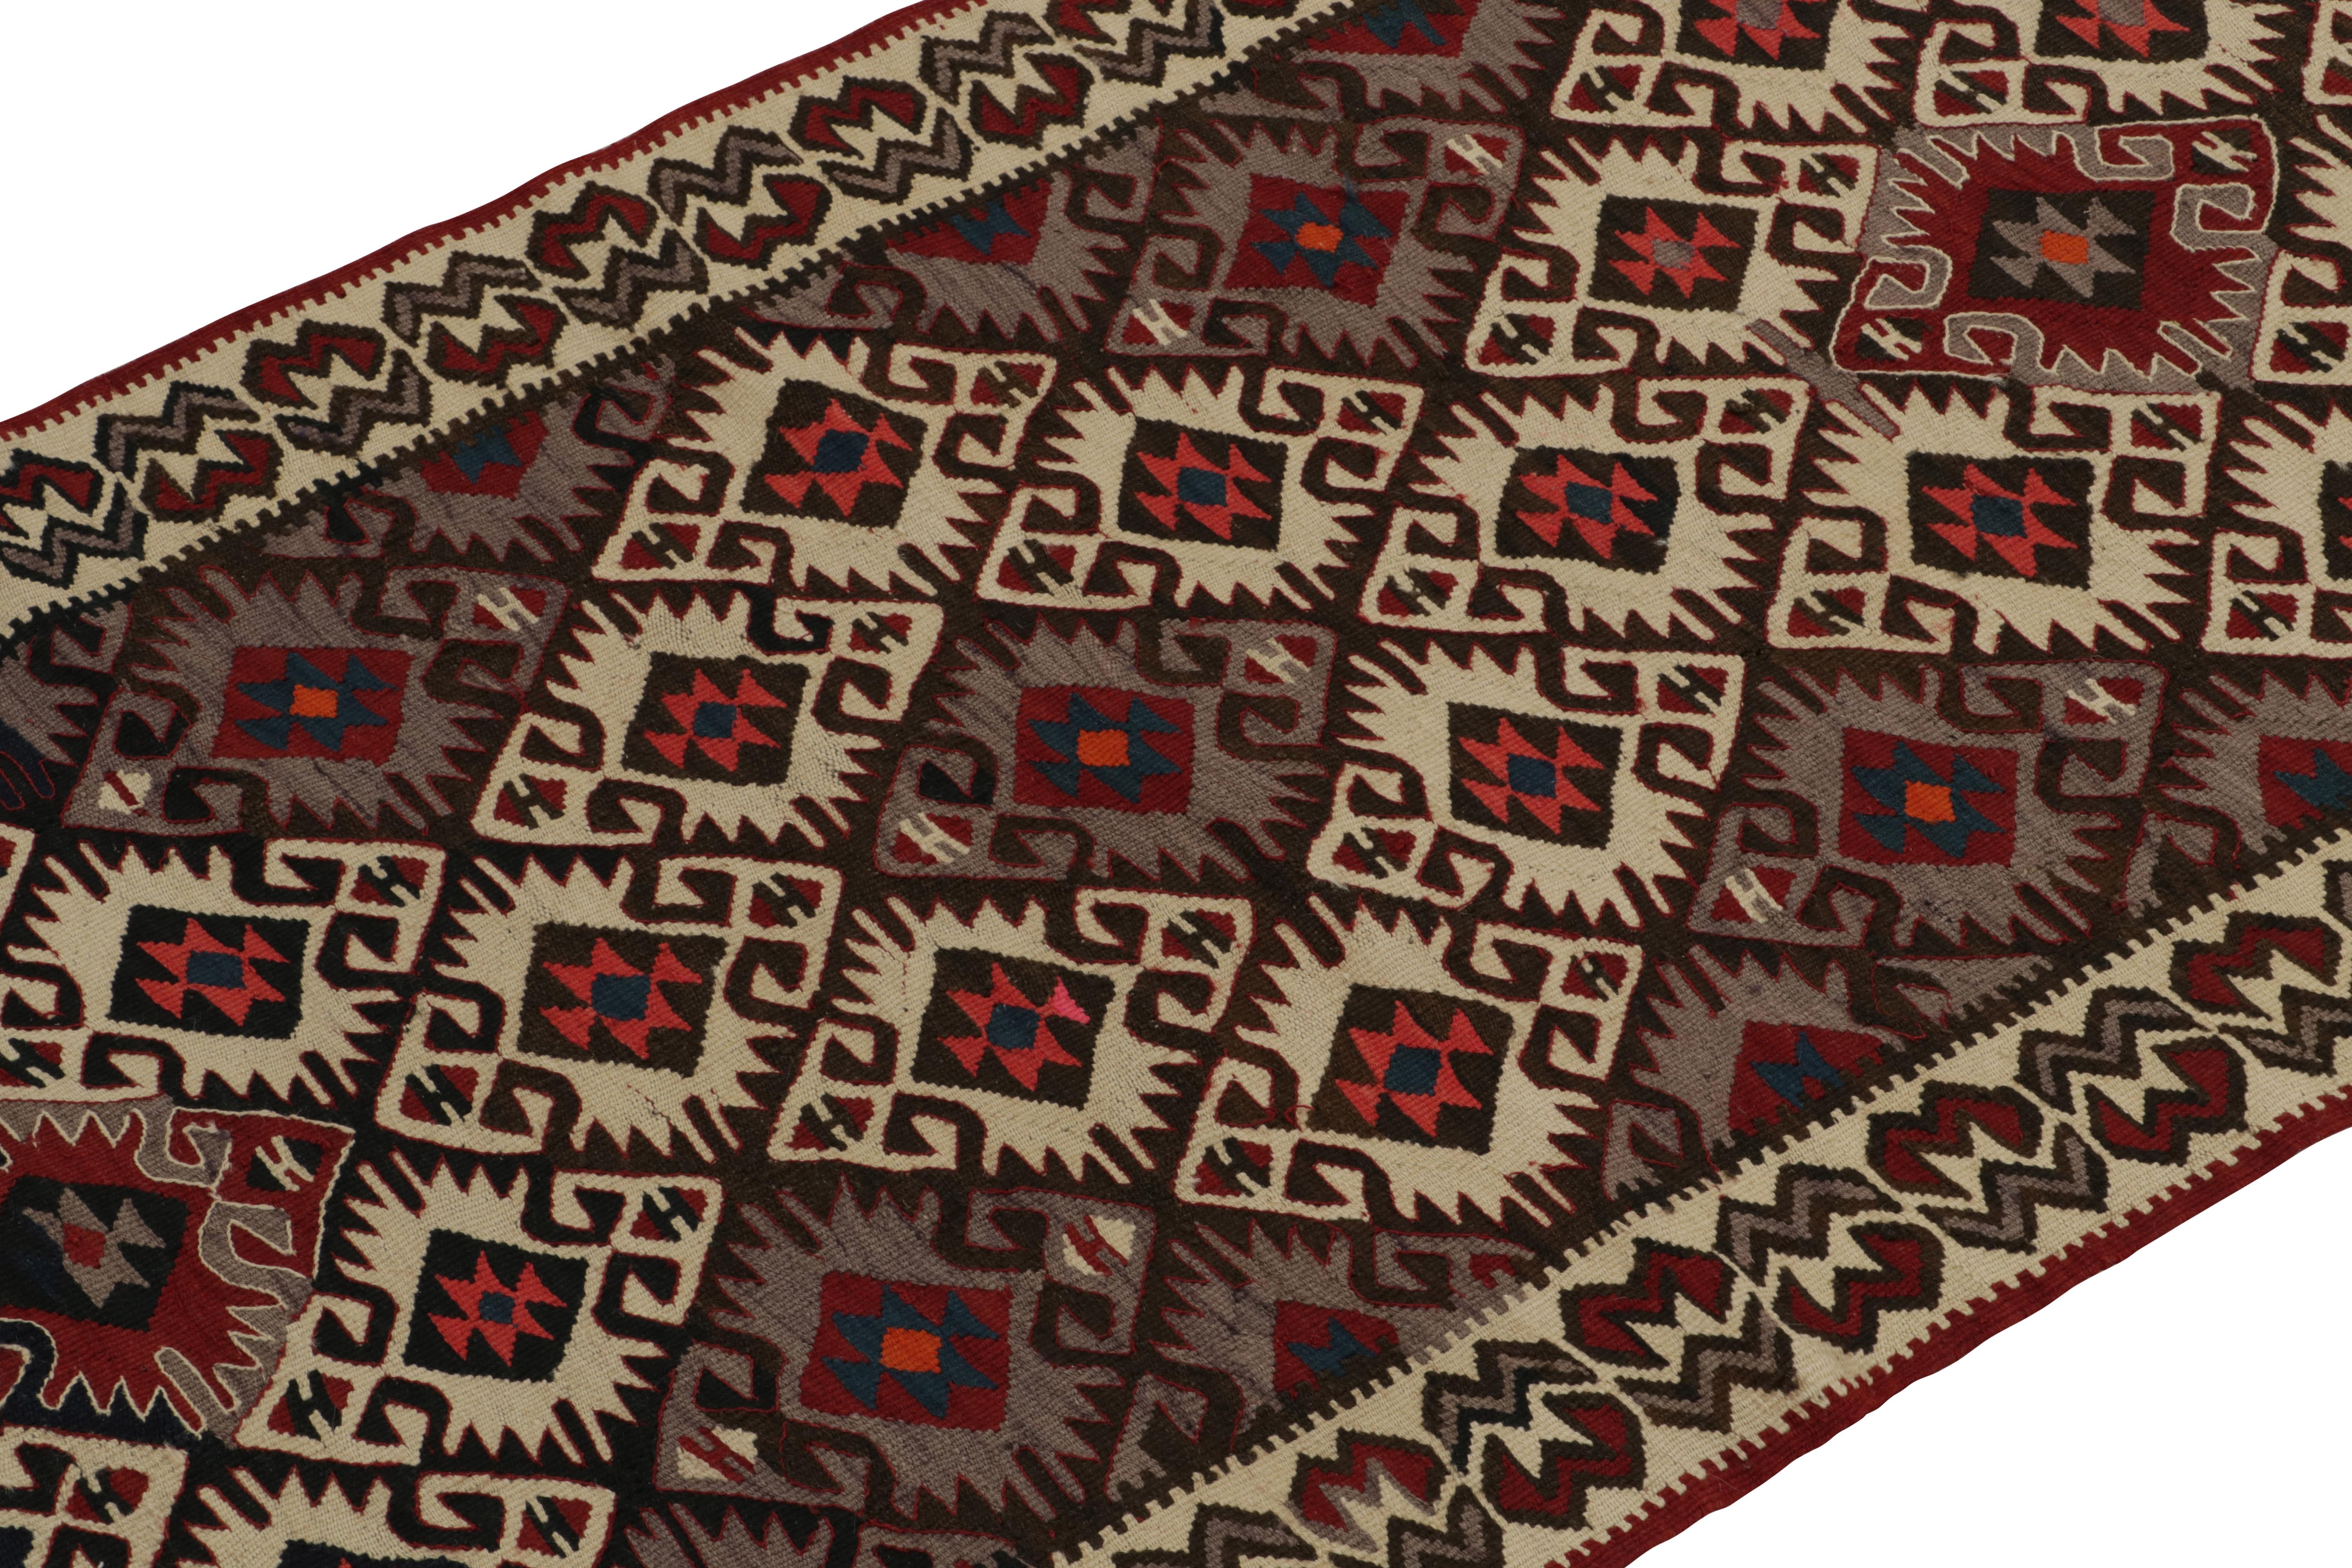 Antique Turkish Kilim Rug in Beige-Brown, Gray Tribal Pattern by Rug & Kilim In Good Condition For Sale In Long Island City, NY